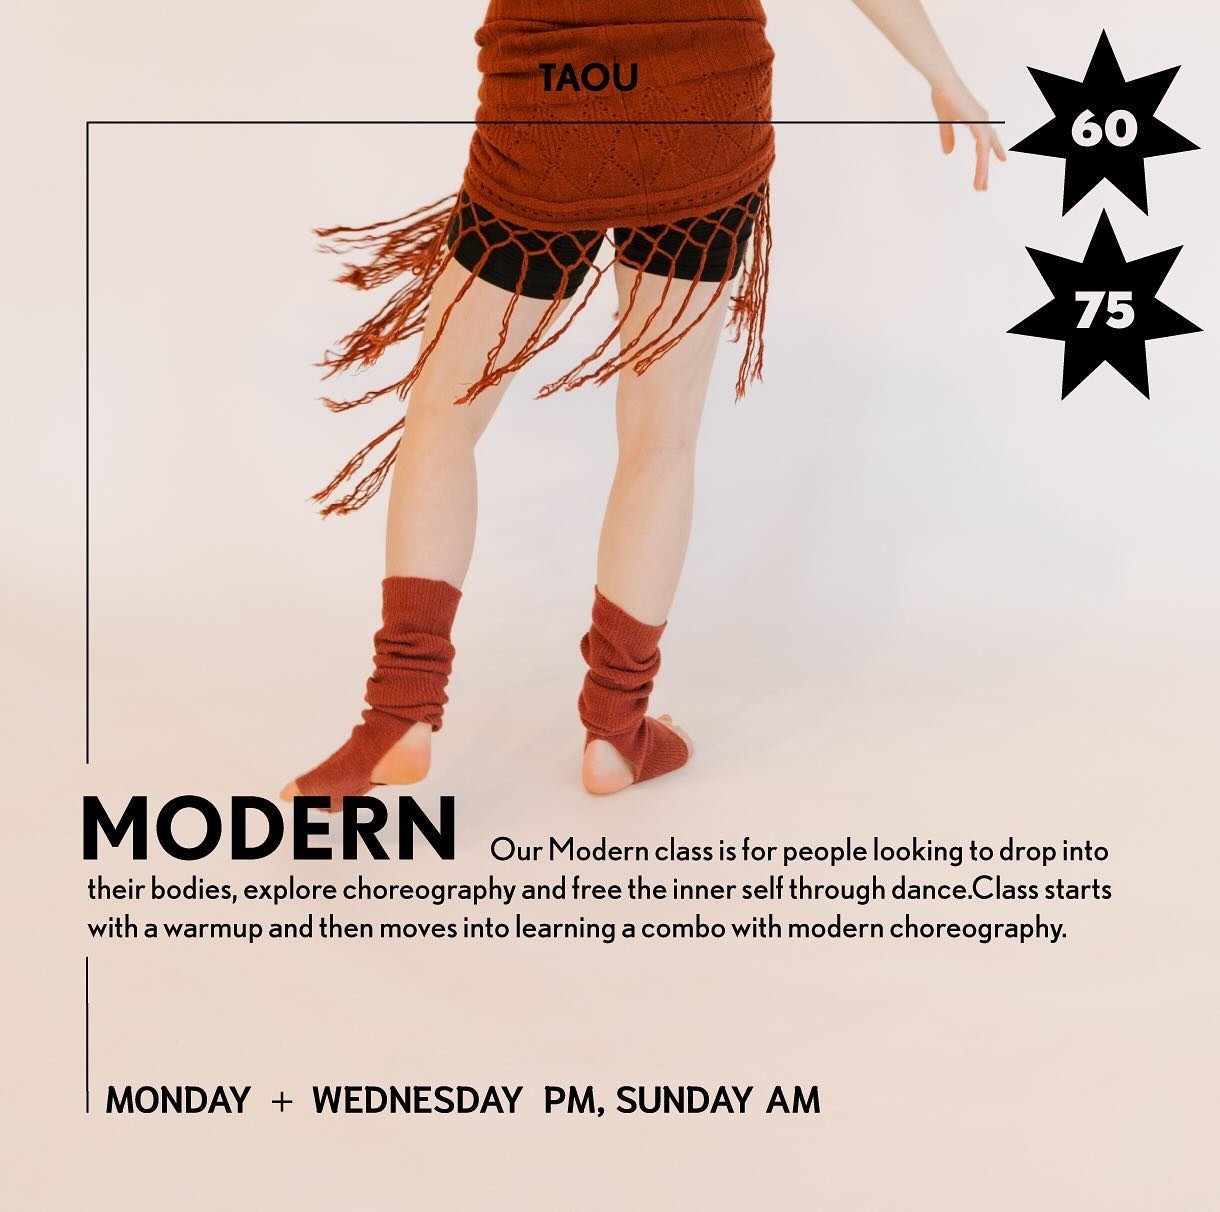 DANCE WITH US! Our Modern class is for people looking to drop into their bodies, explore choreography and free the inner self through dance.
 
Class starts with a warmup and then moves into learning a combo with modern choreography. All levels welcom